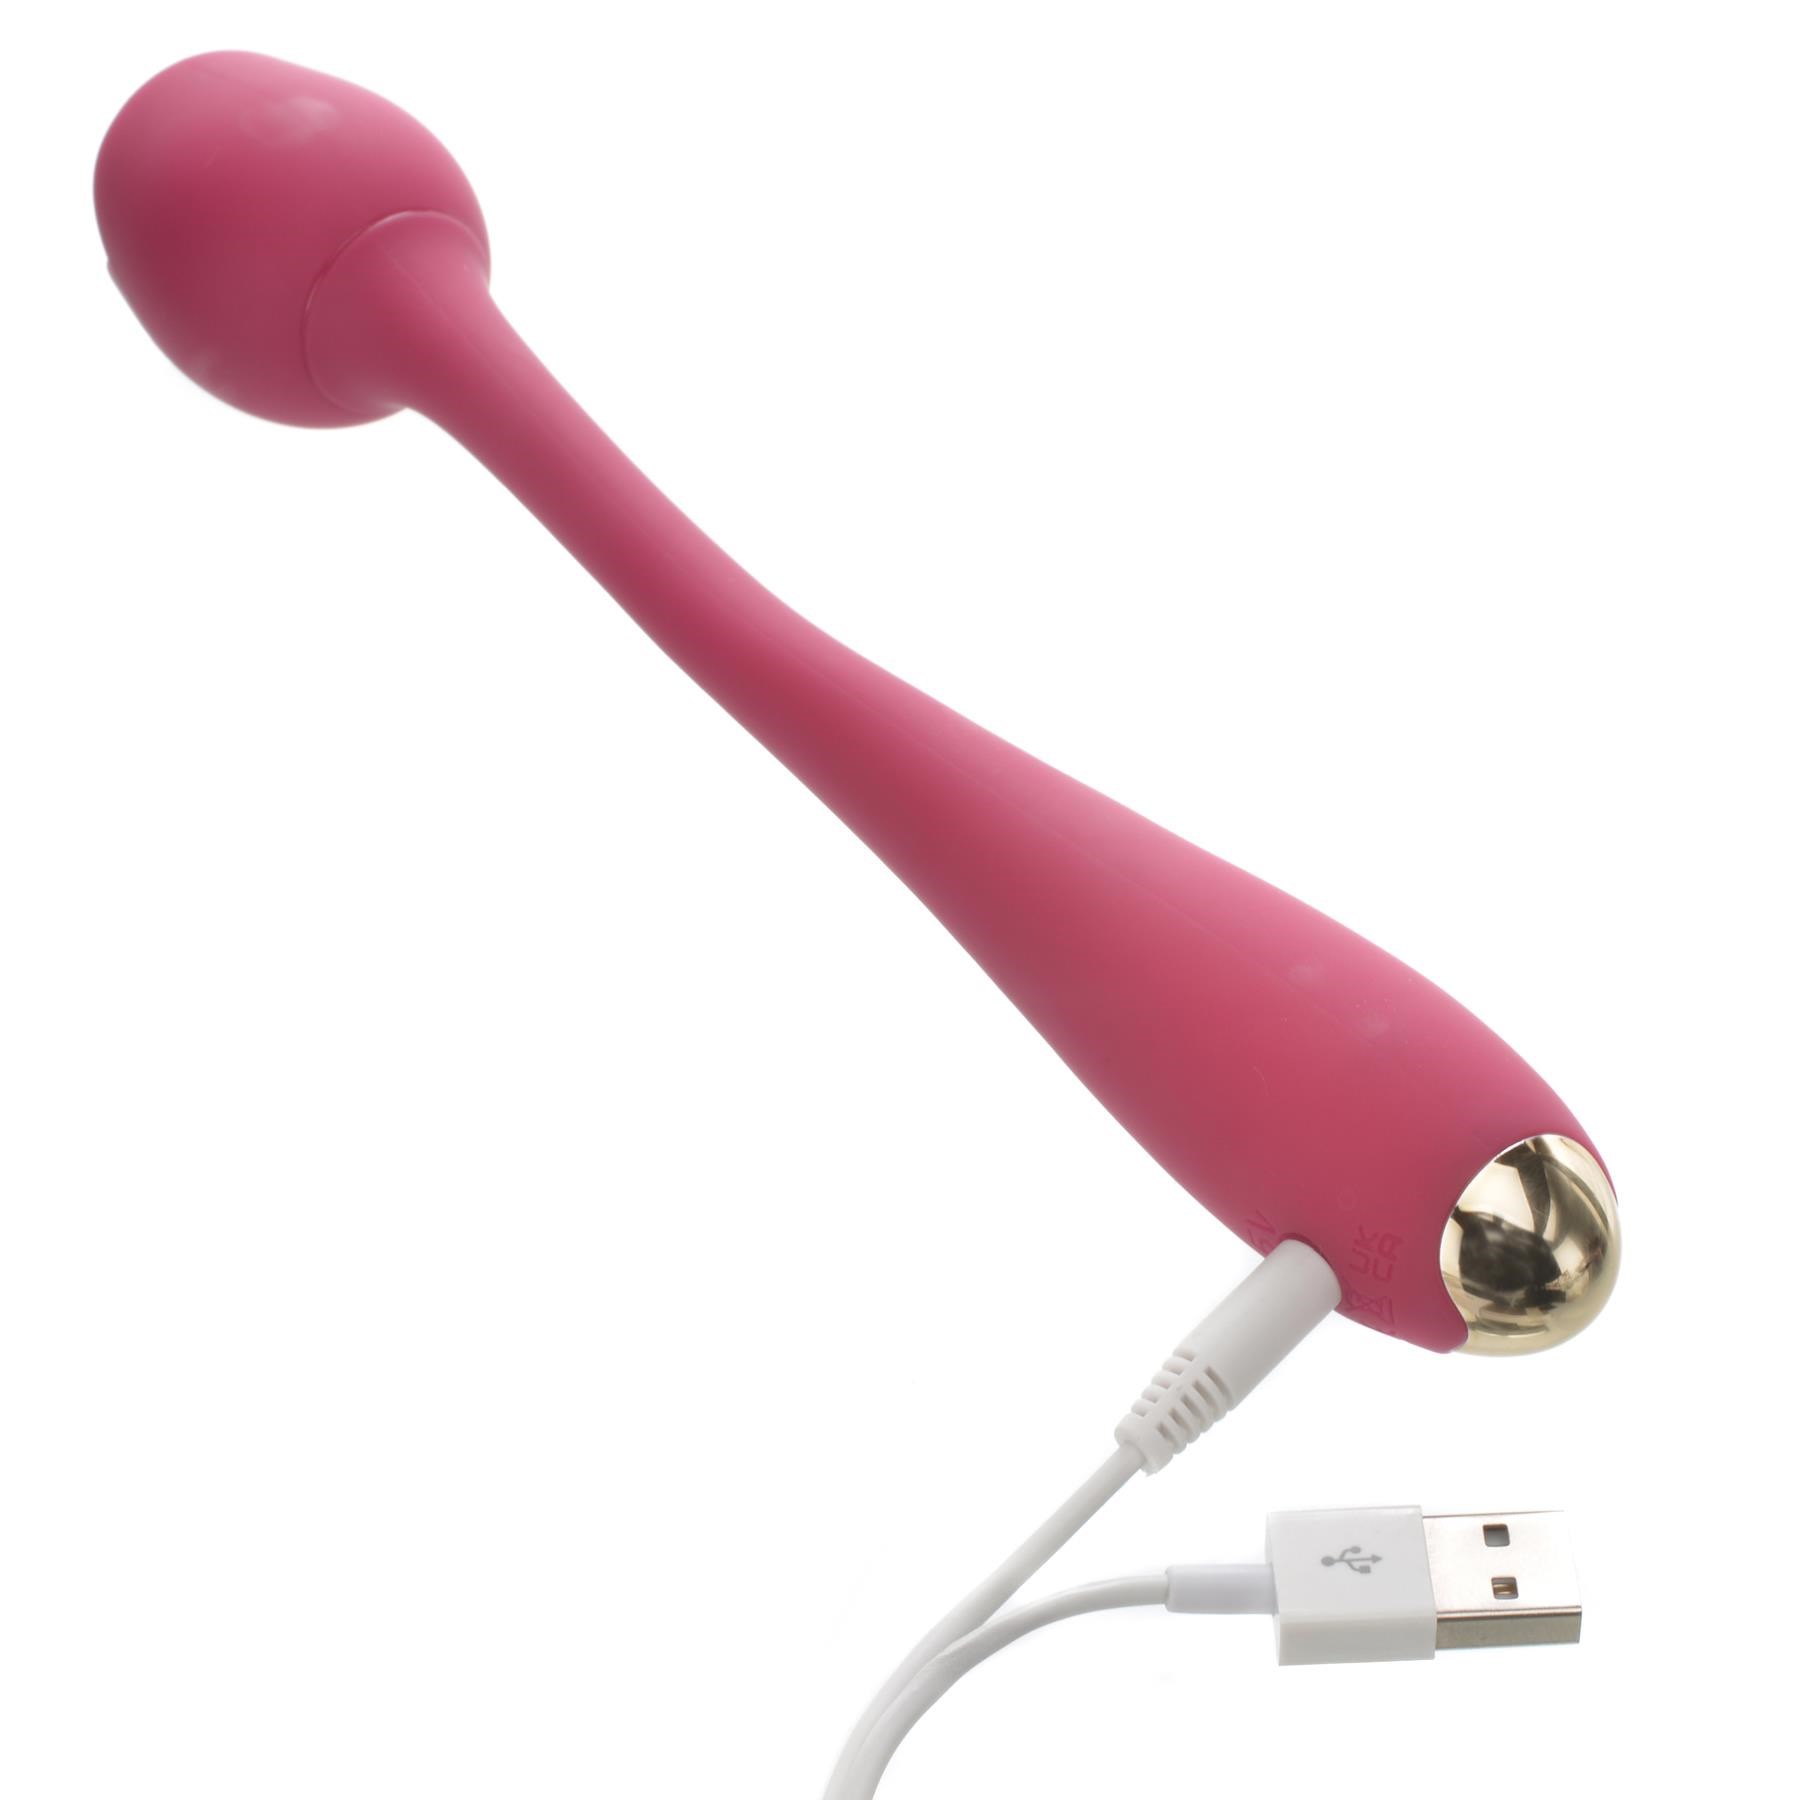 Rosegasm Long Stem Flexi G-Spot Vibrating Rose- Showing Where Charging Cable is Placed